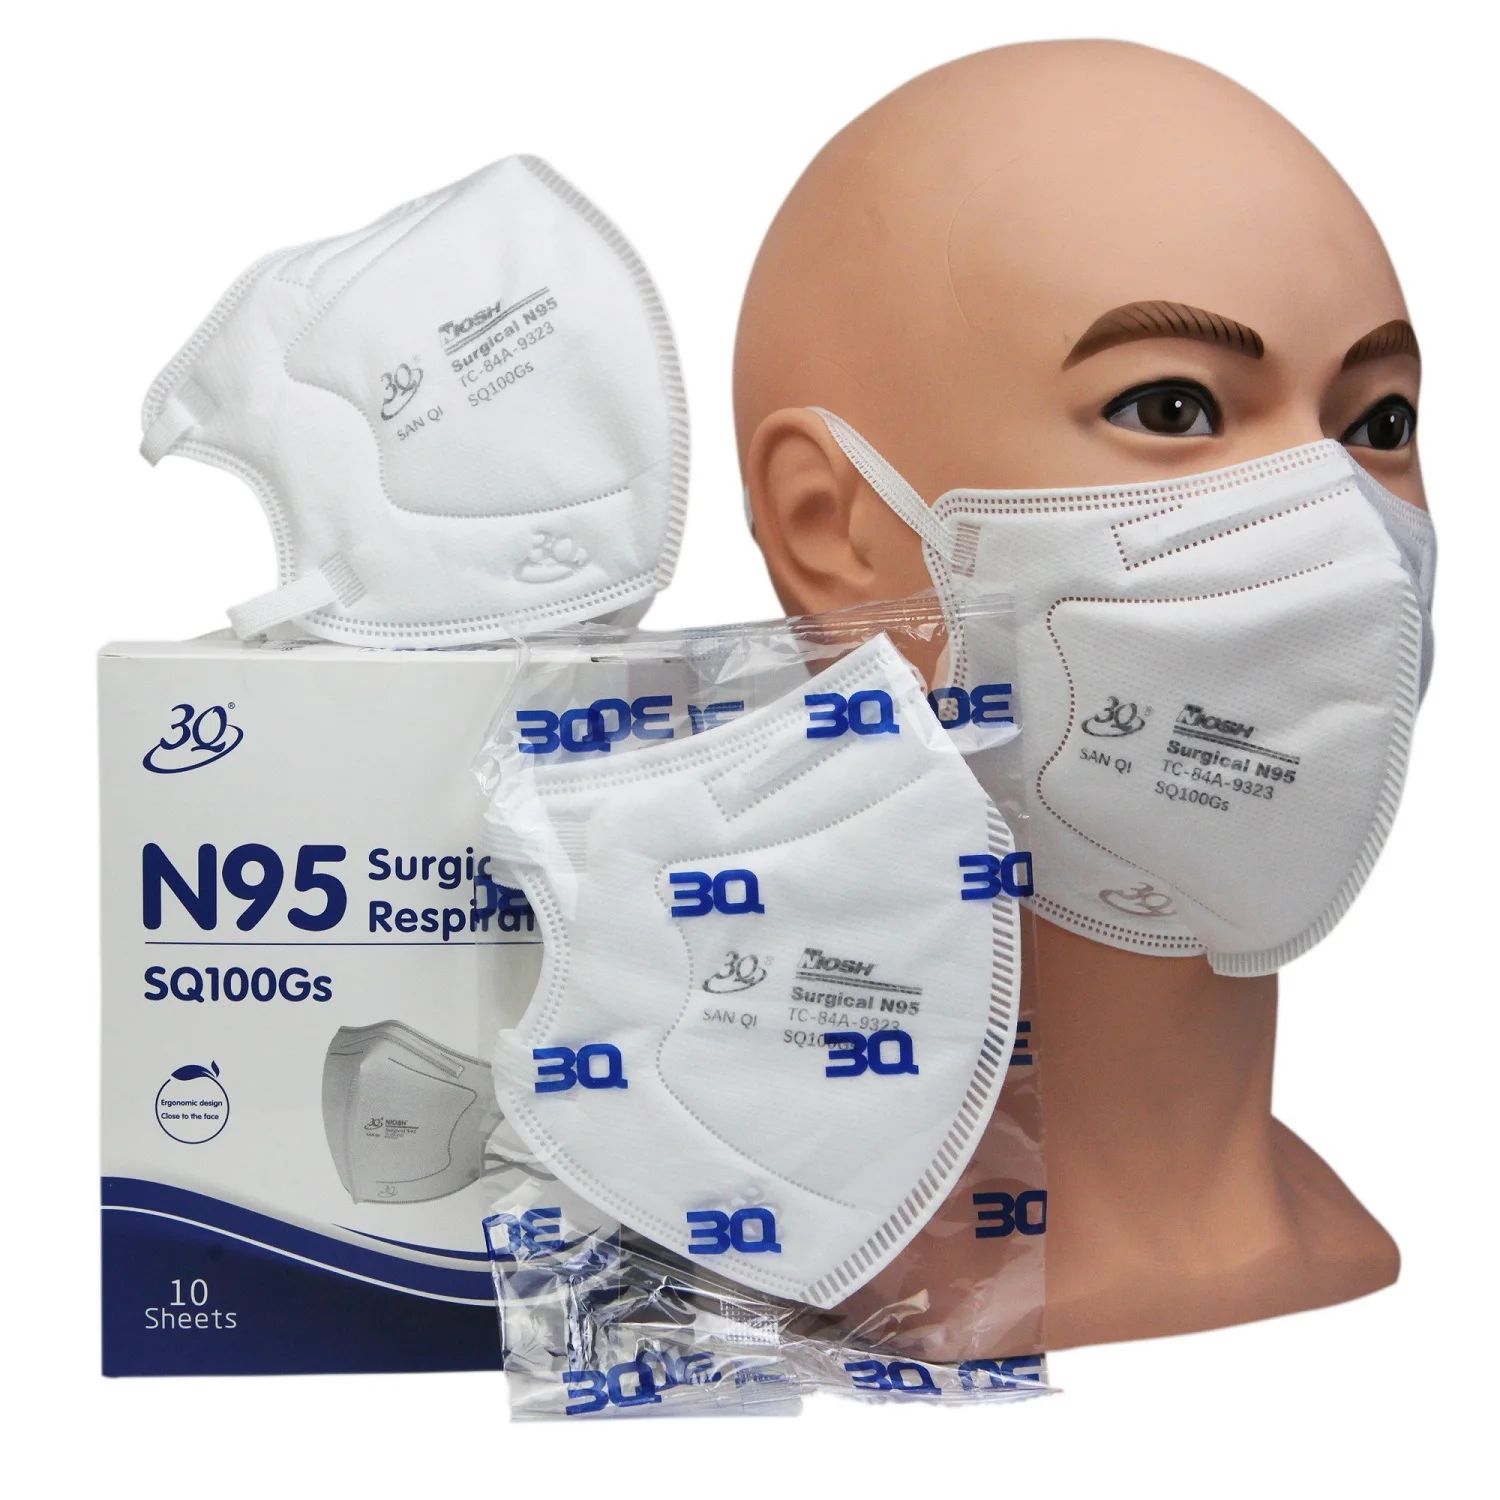 N95 Dust Mask Niosh Approved Dust Mask N95 Face Mask Buy N95 Mask N95mask Disposable 0967